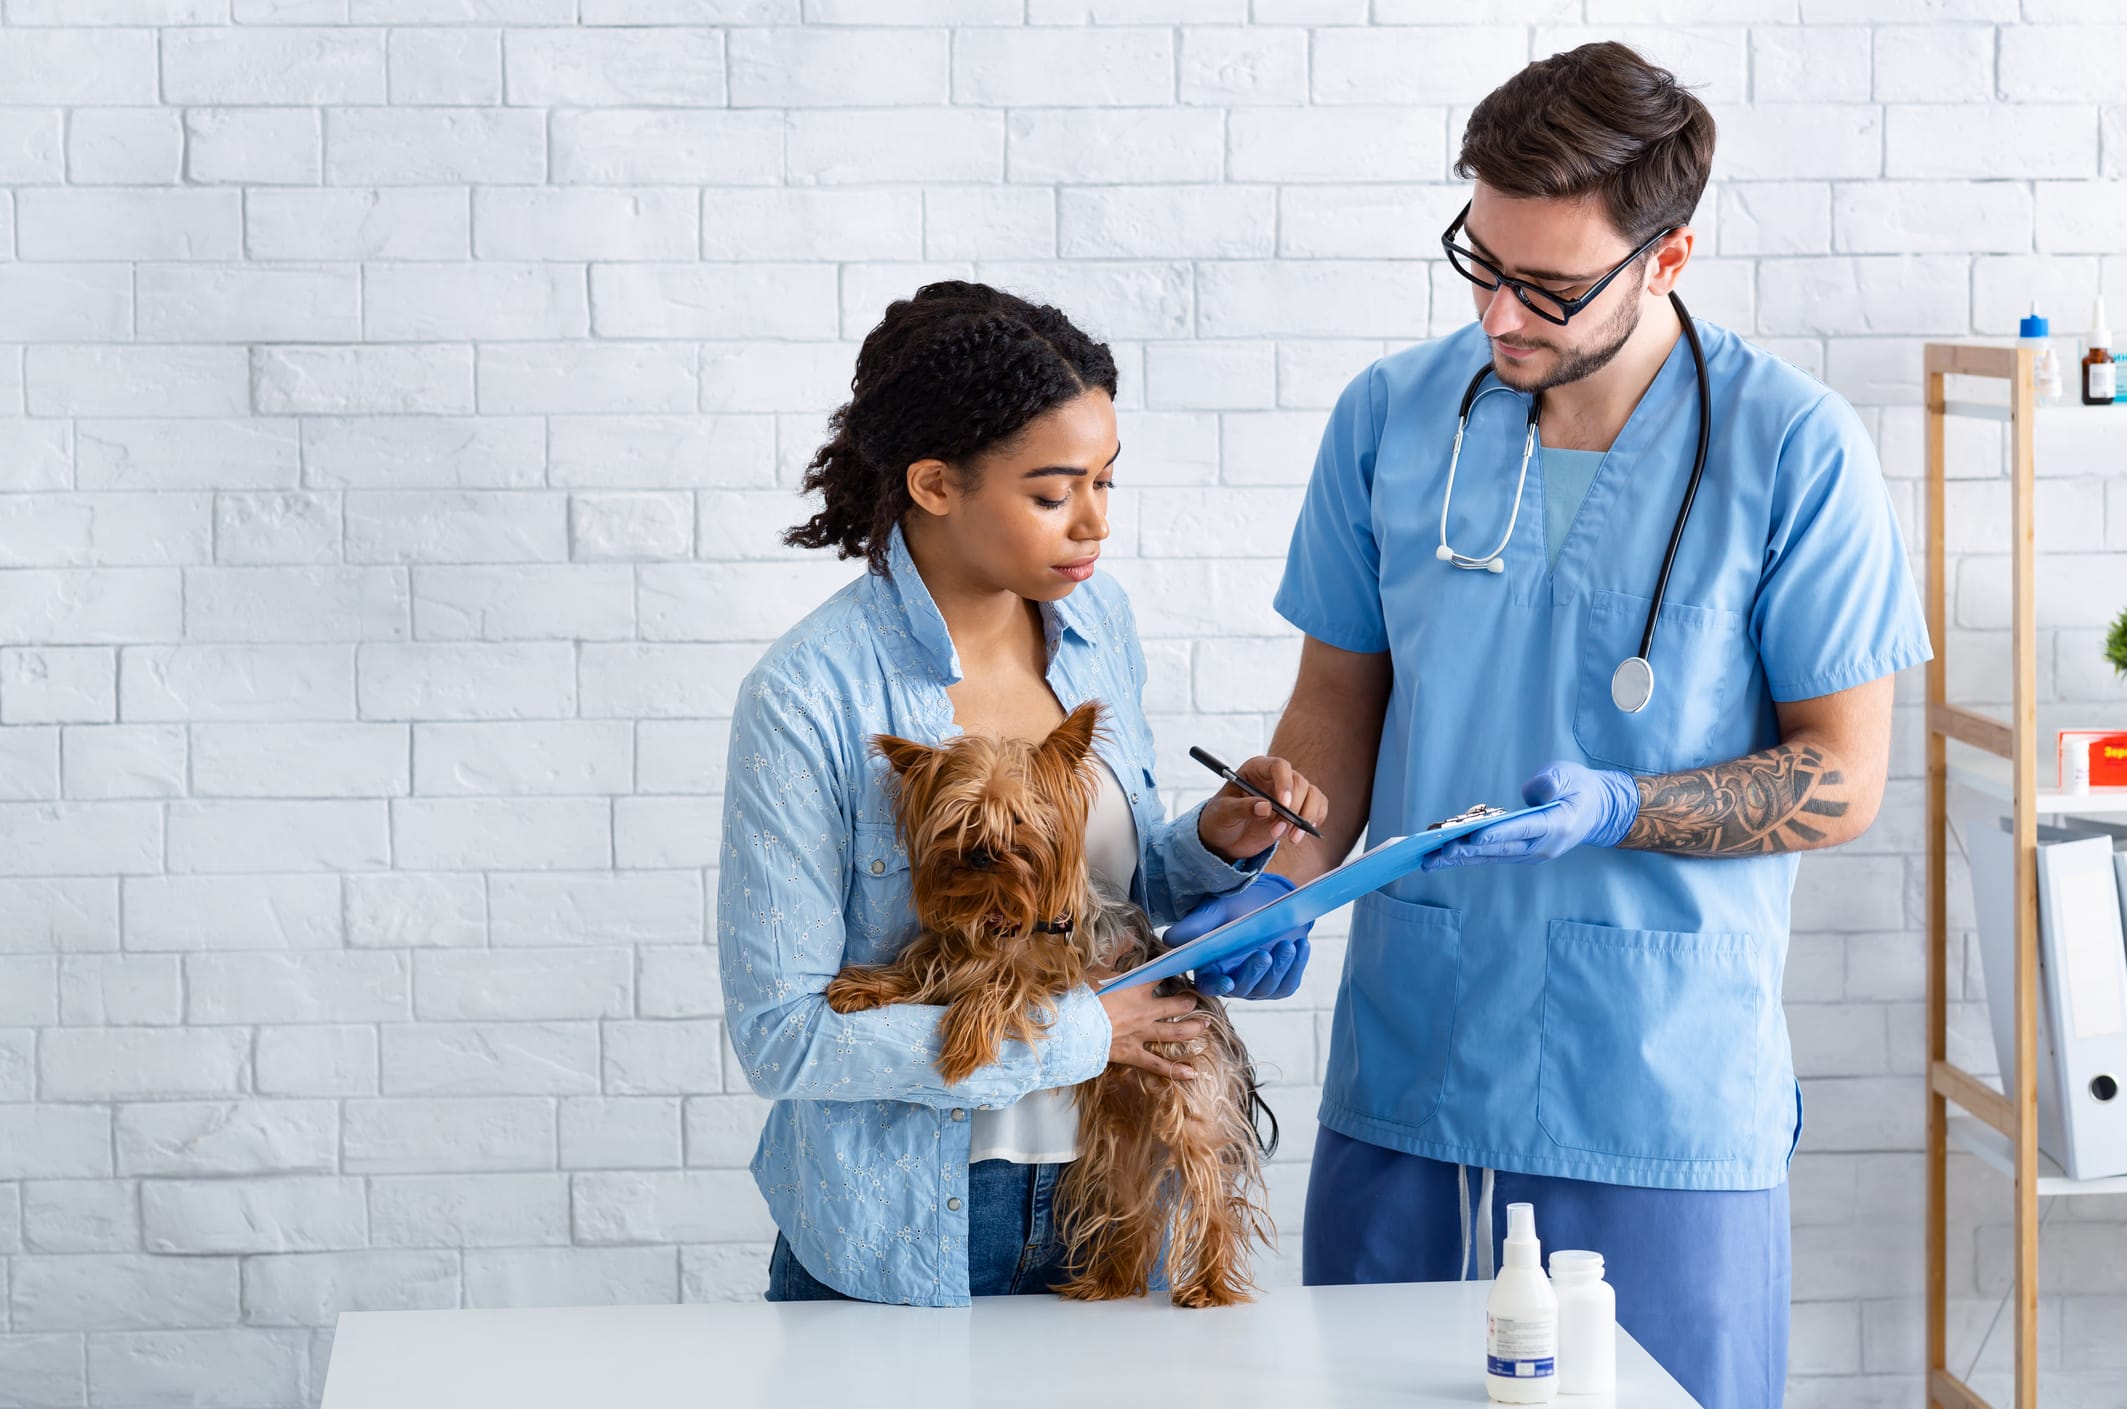 Dog owner on visit to veterinarian doctor at animal hospital, blank space